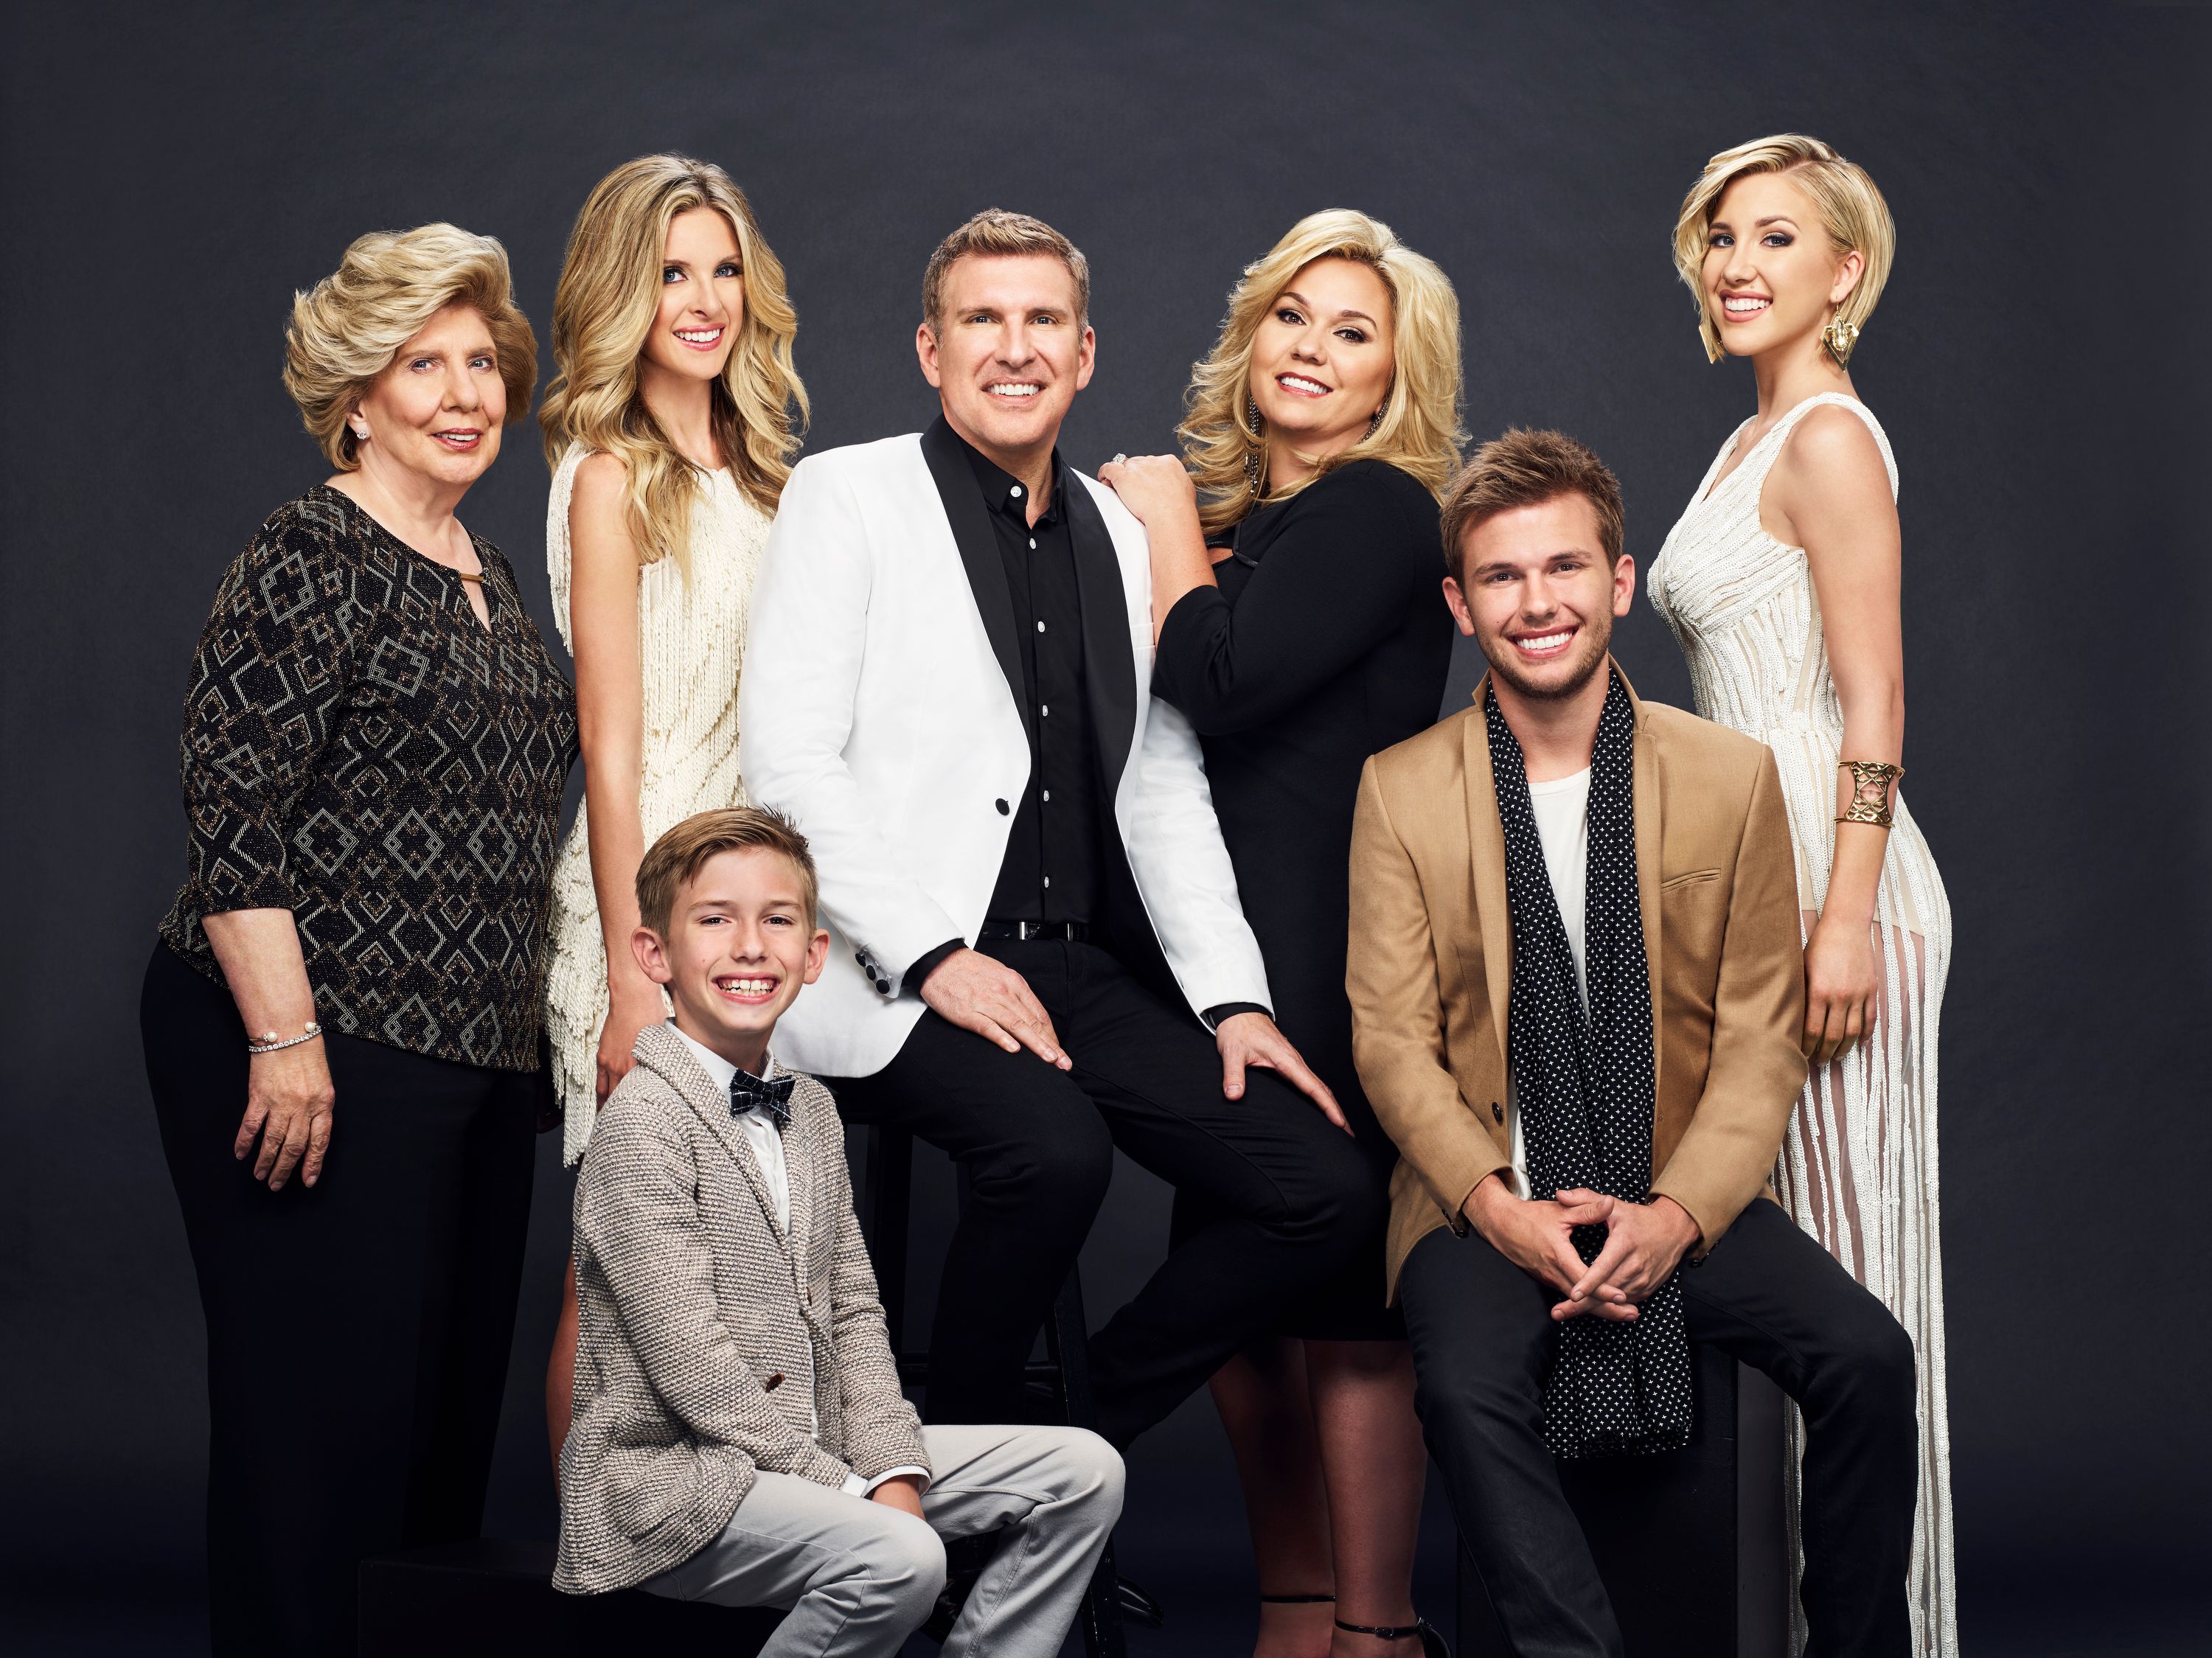 Faye Chrisley, Lindsie Chrisley Campbell, Grayson, Todd, Julie, Chase, and Savannah Chrisley pictured on March 17, 2016. | Photo: Getty Images